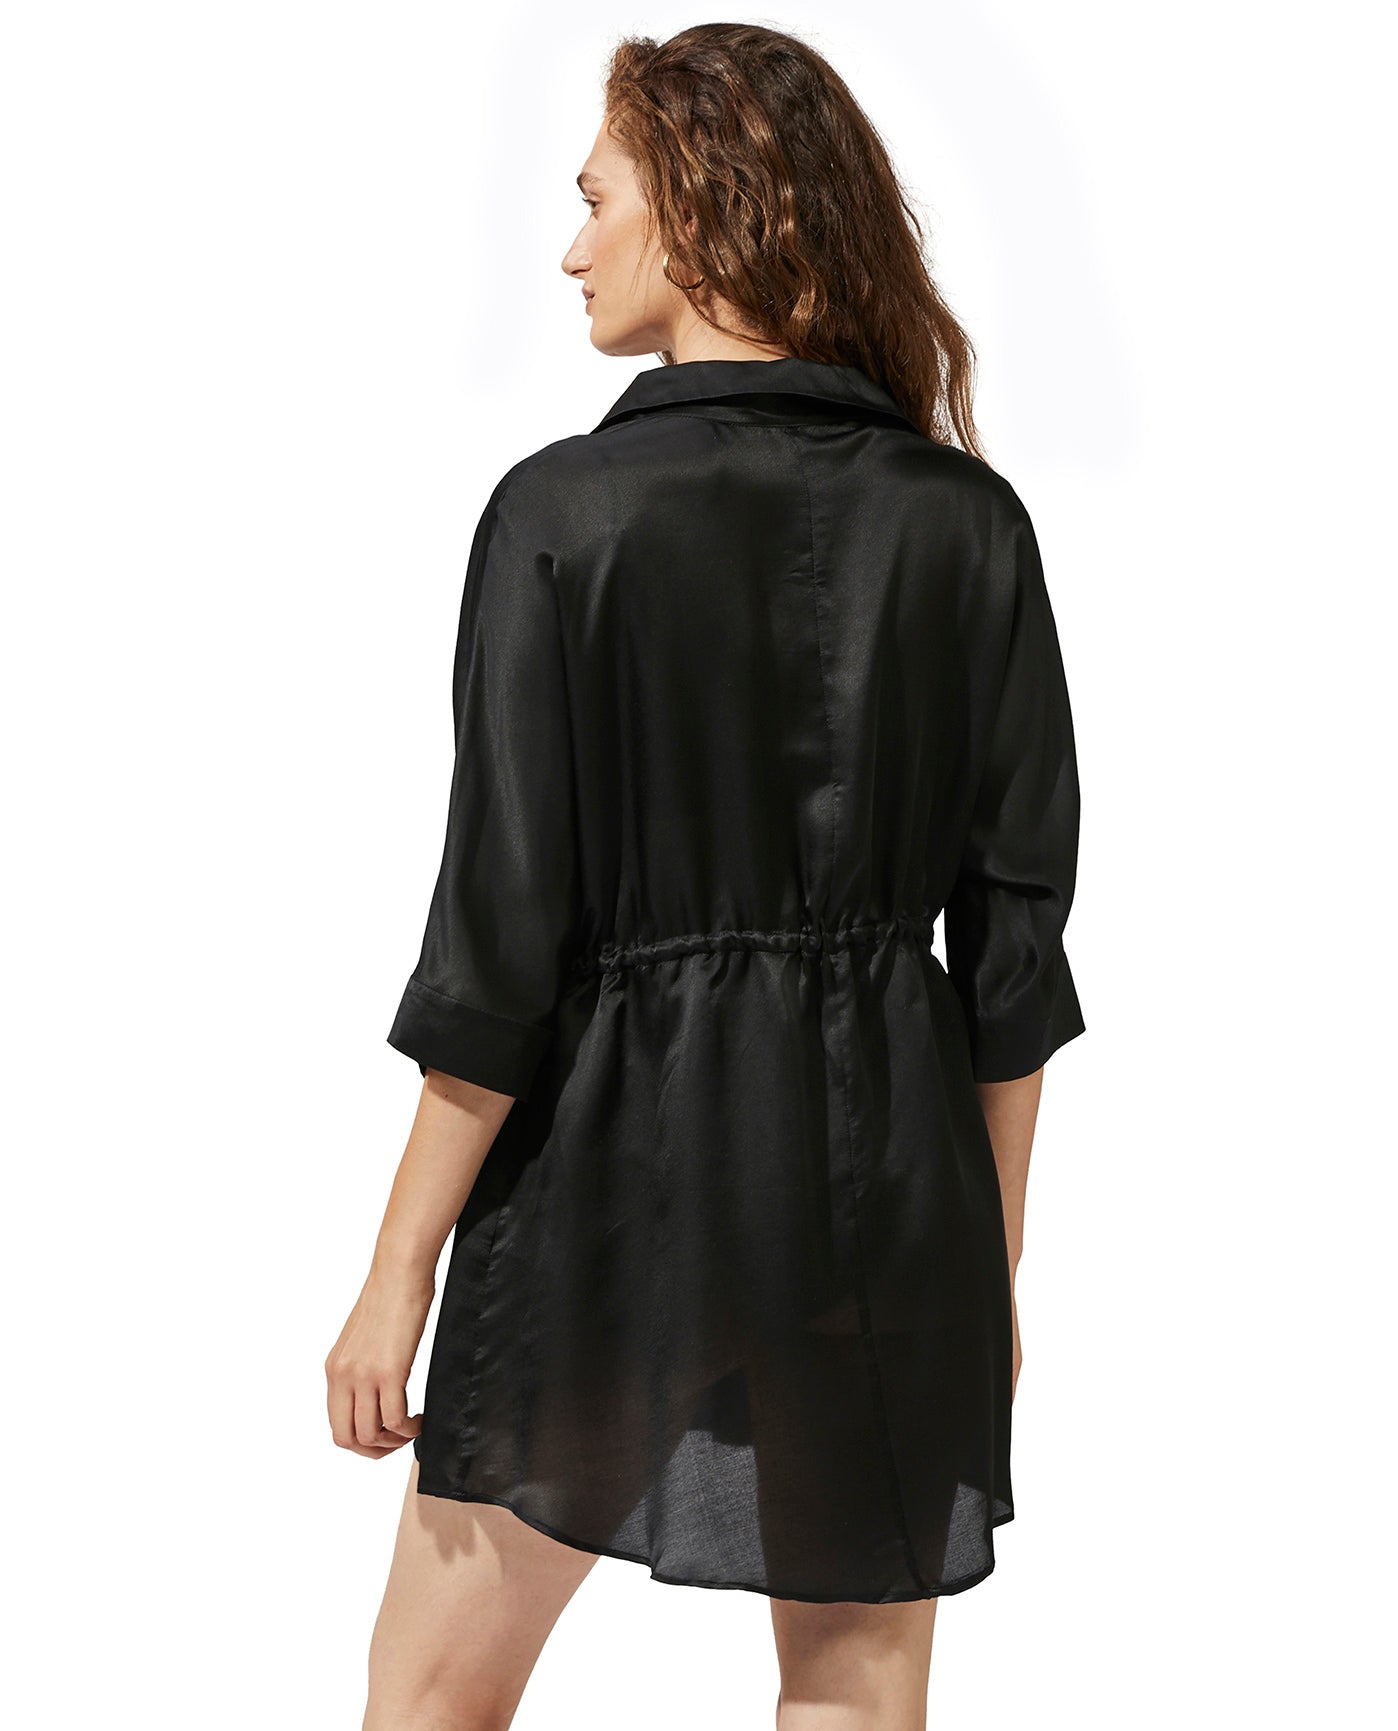 Back View Of Luma Buttoned Cover Up Blouse | LUMA IVY BLACK